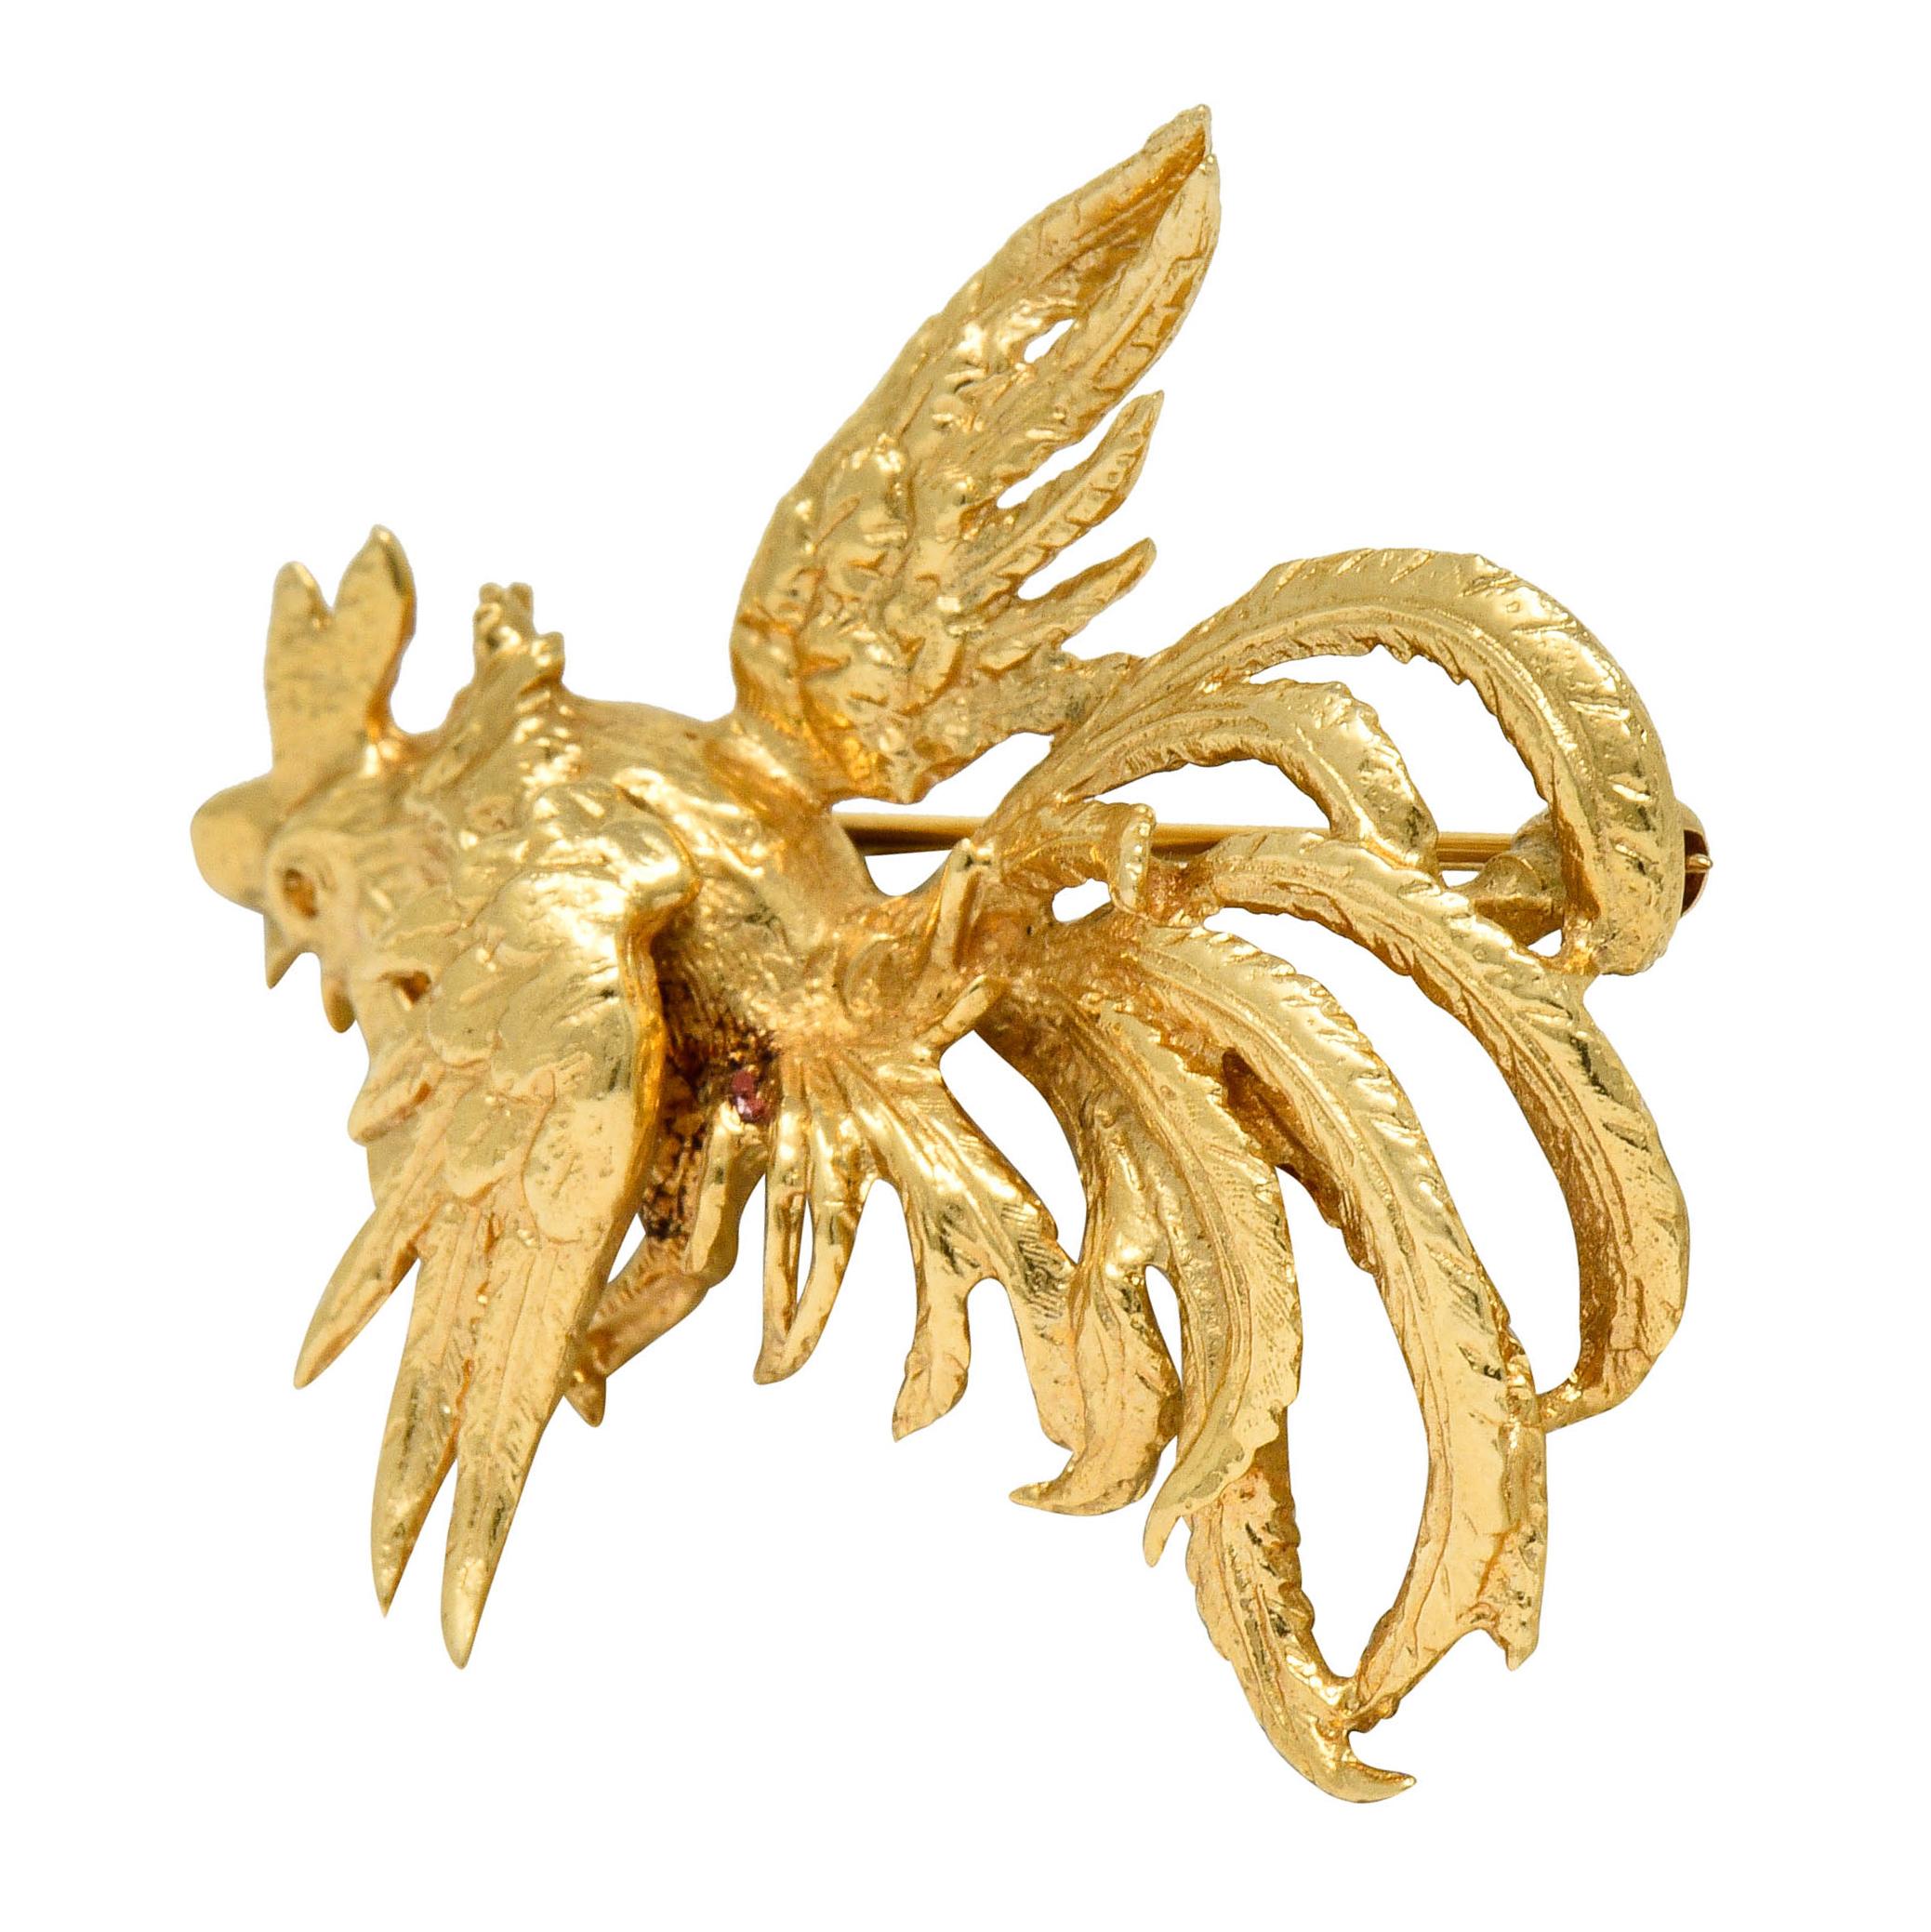 Clips are designed as two lively roosters with spread wings and fancifully plumed tail feathers

Dynamically formed with deeply engraved details

Completed by pin stems and locking closures

Signed Cini and stamped 14K for 14 karat gold